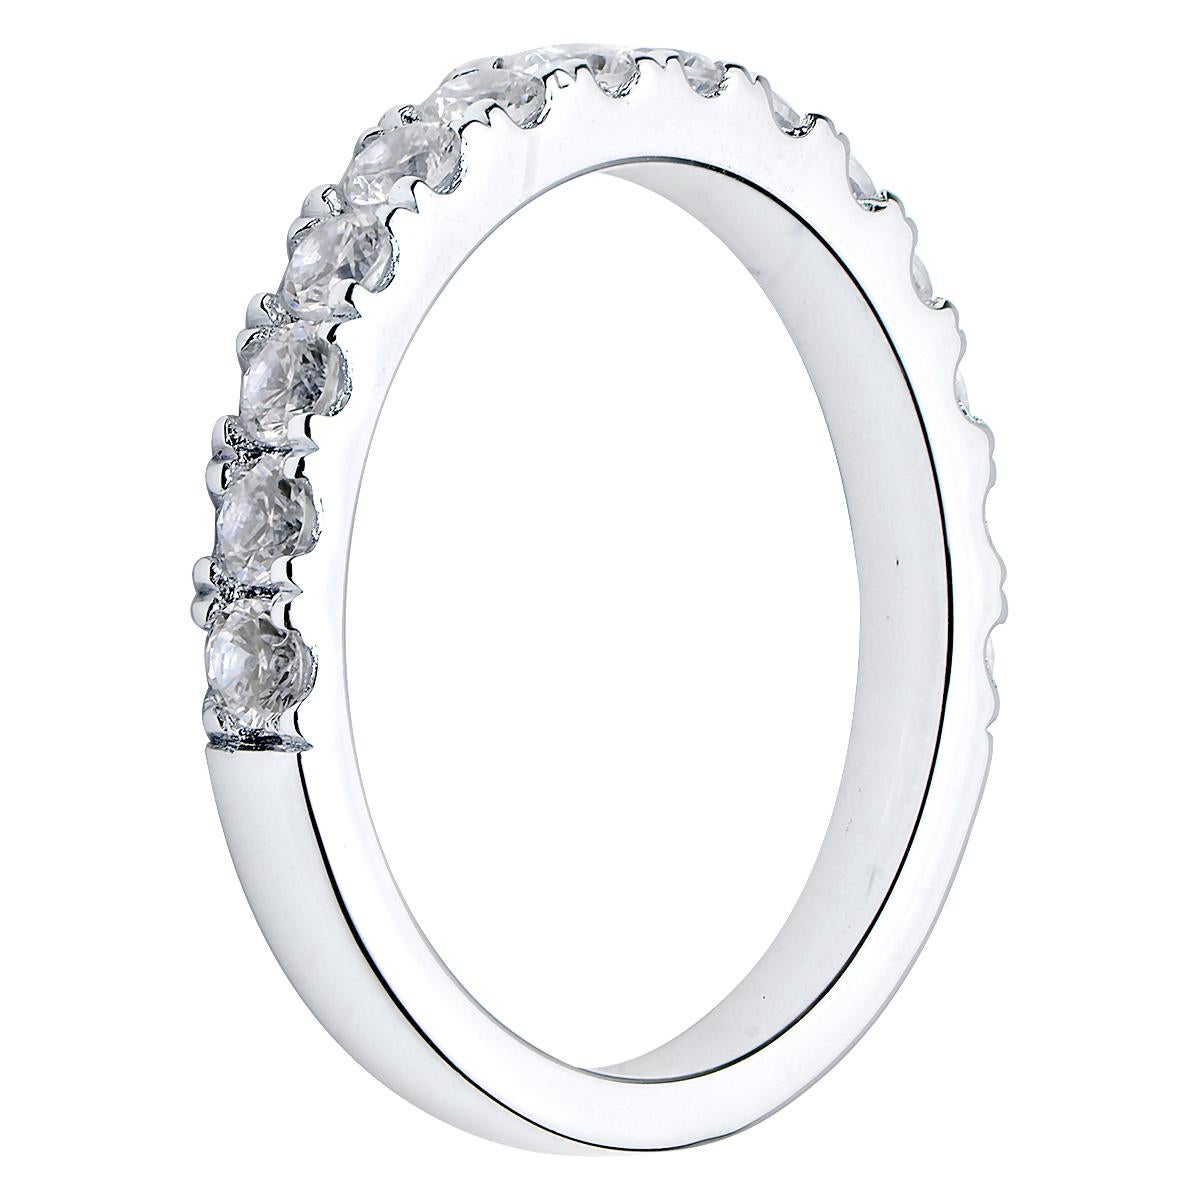 This beautiful band has VS2, G quality diamonds going halfway around the band. There are 14 round diamonds totaling 0.76 carats. The ring is made from 3.2 grams of 18 karat white gold and is size 5. 